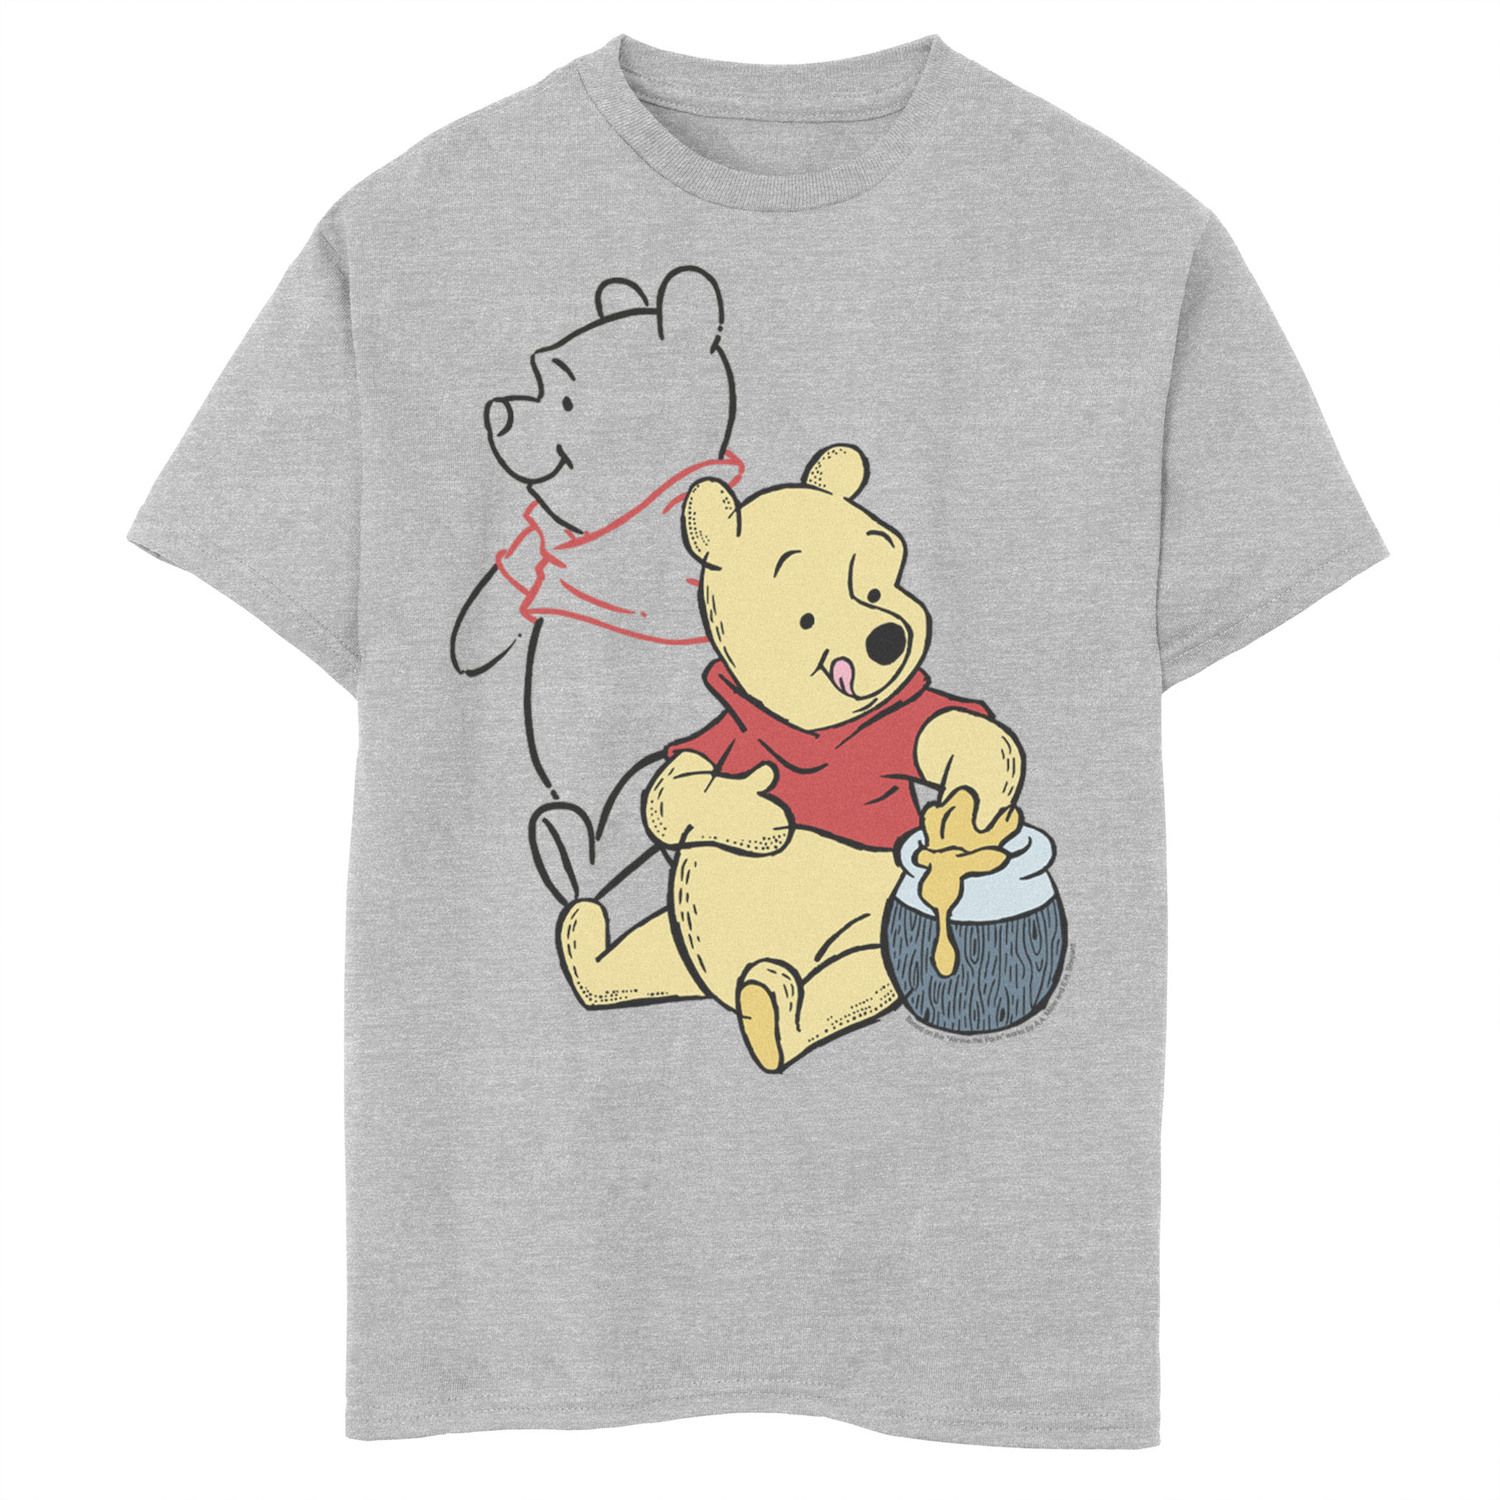 Image for Disney 's Winnie the Pooh Boys 8-20 Line Art Portrait Graphic Tee at Kohl's.